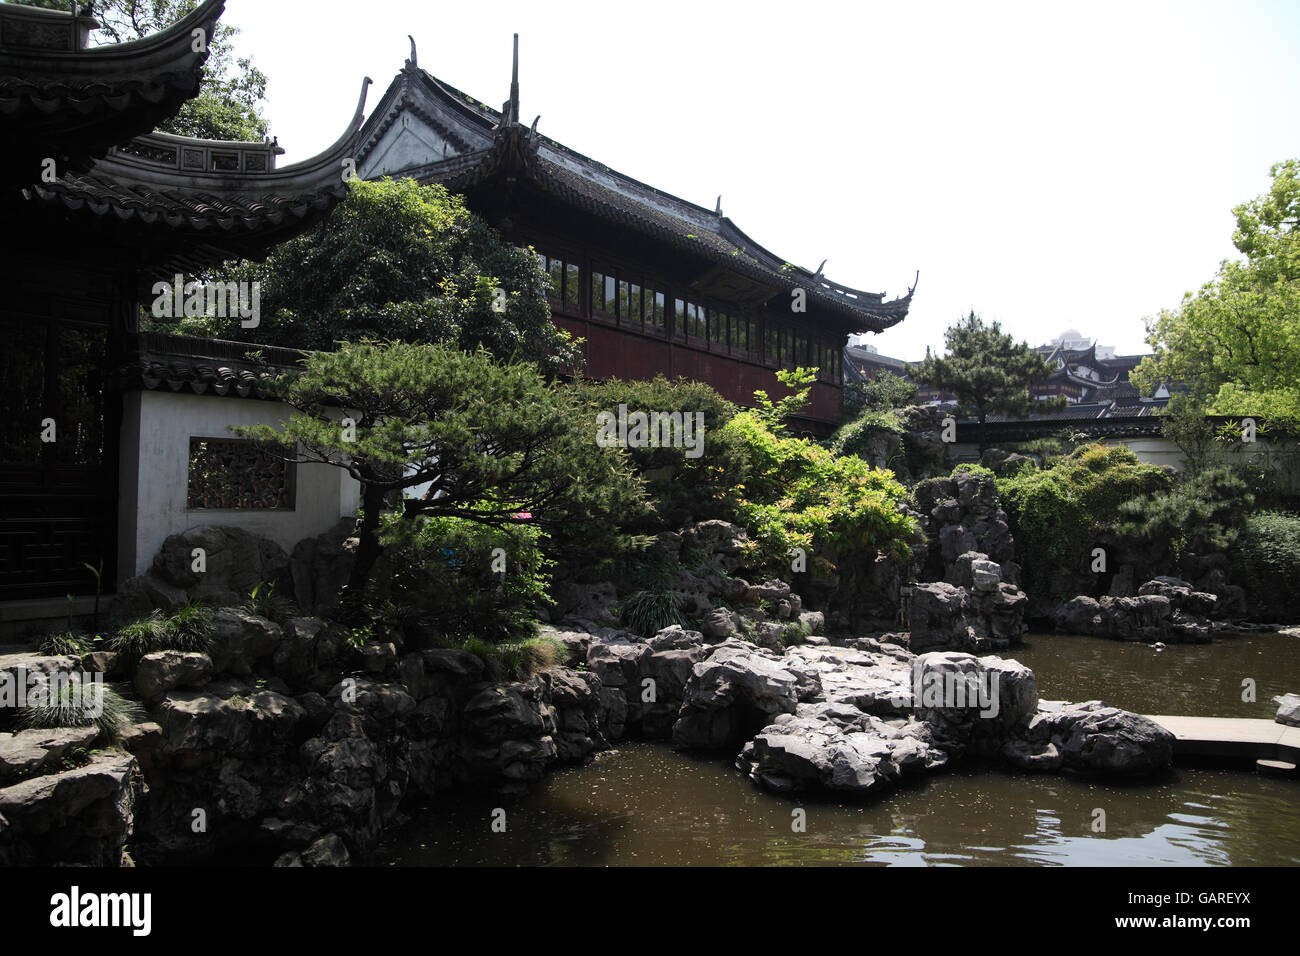 A house, a pond and vegetation in the Yu Garden or Yuyuan Garden, a typical 16th century Chinese classical garden. Shanghai, China. Stock Photo